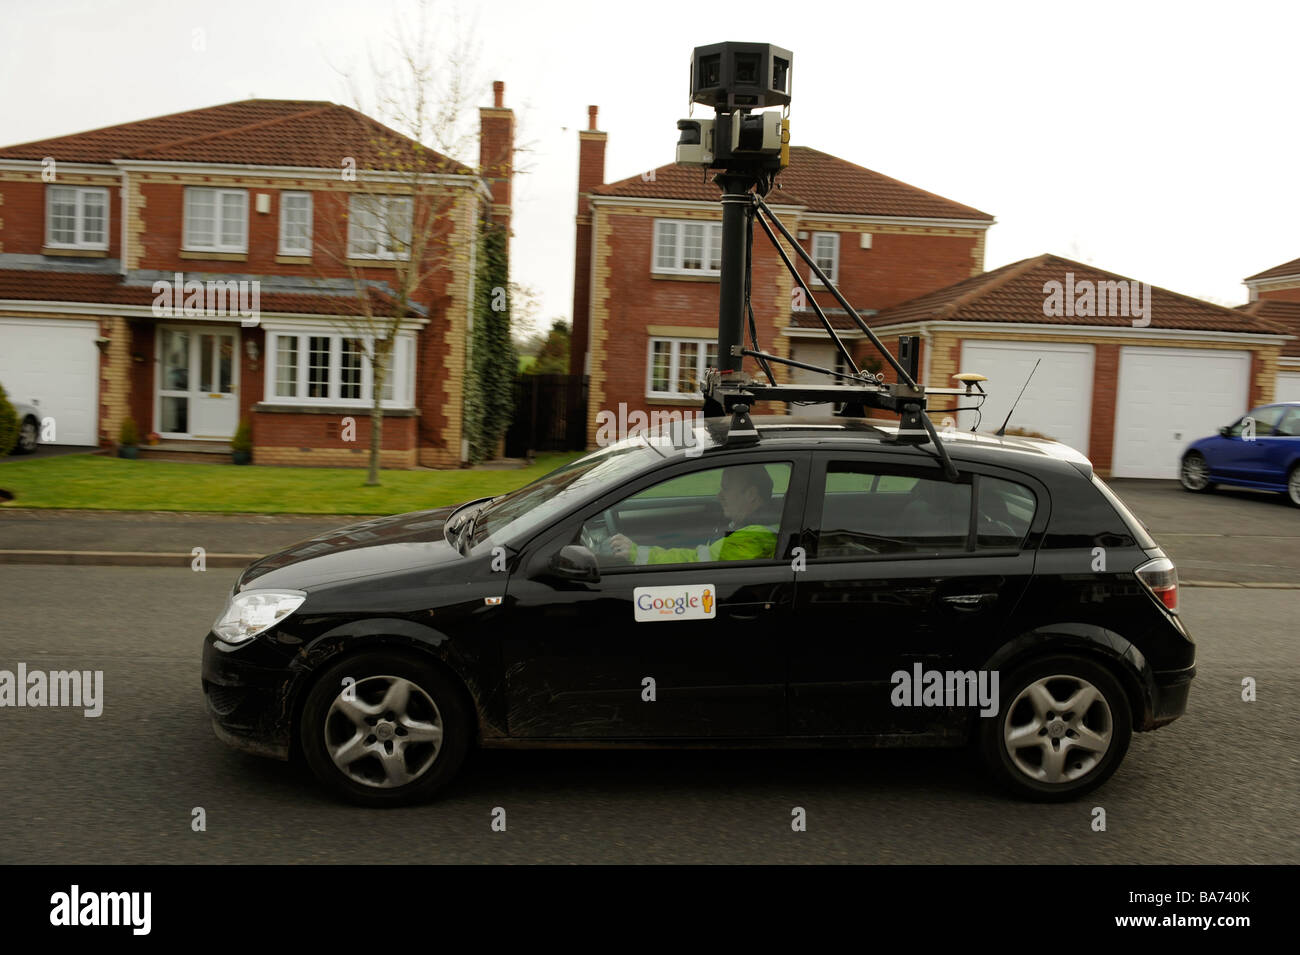 Google streetview car films in a residential street Stock Photo